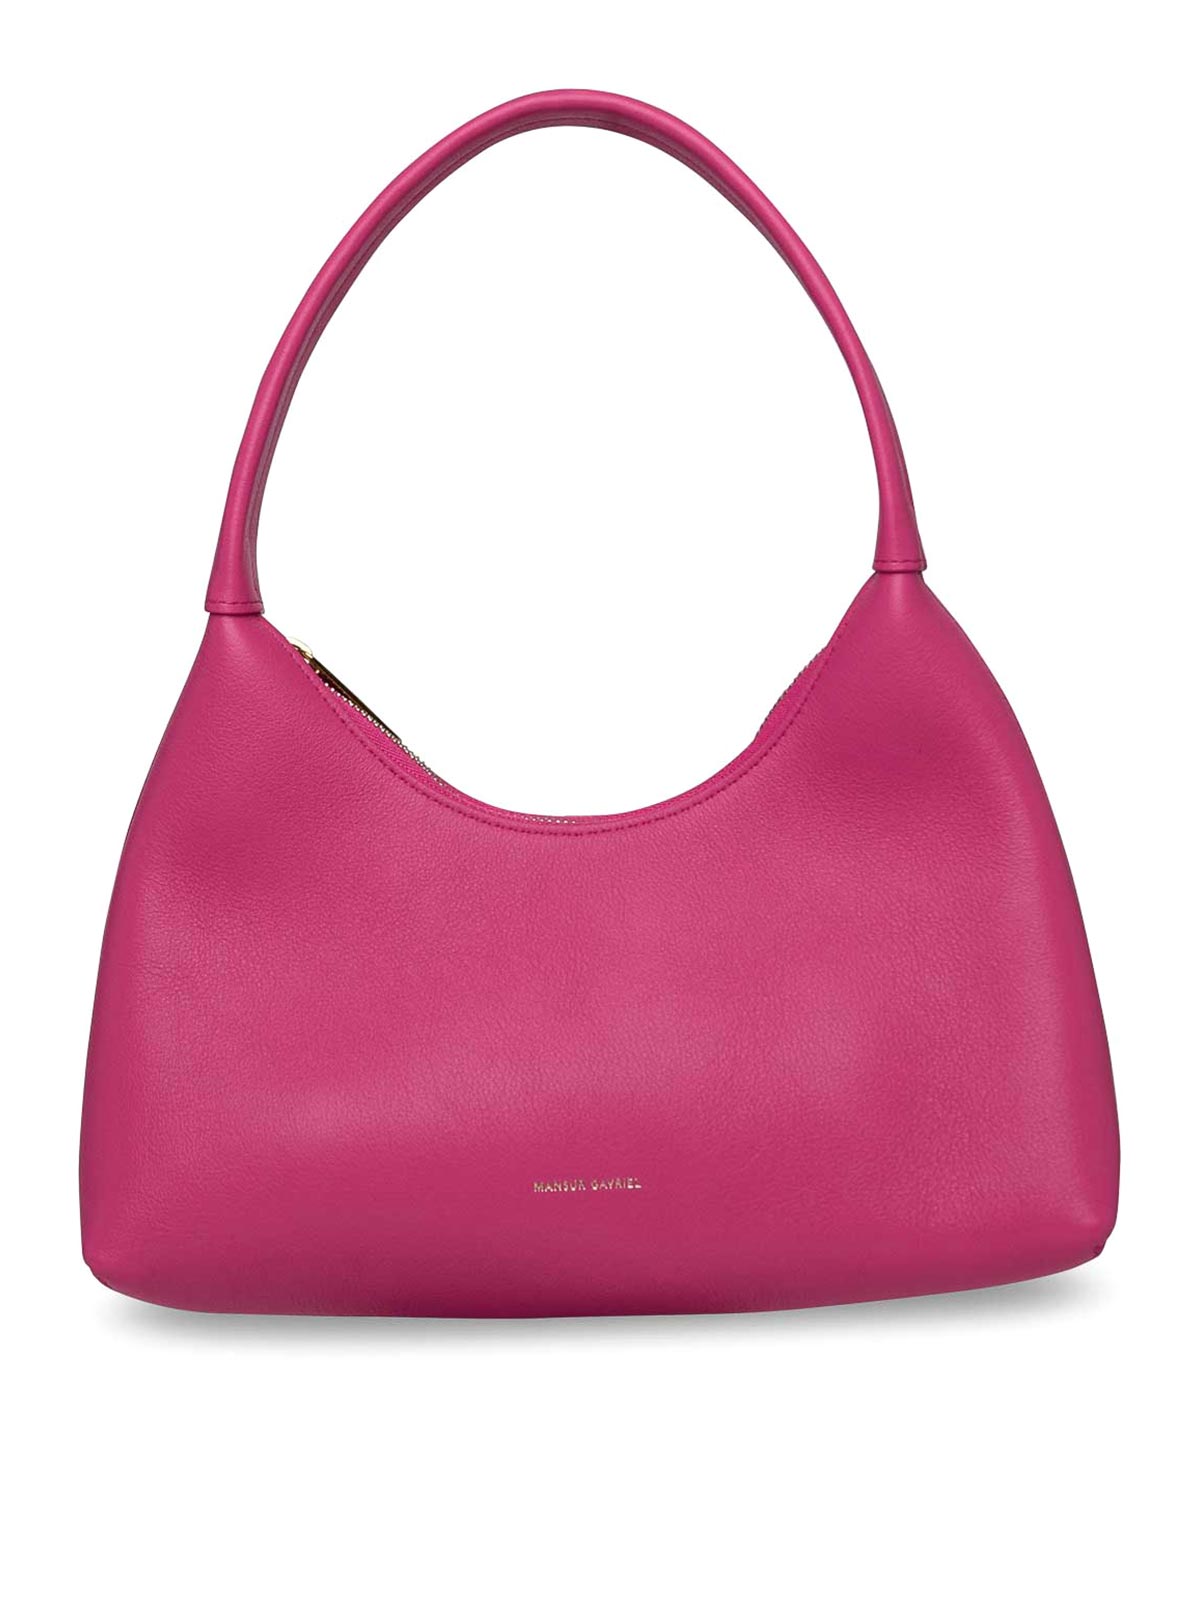 Mansur Gavriel Small Candy Hobo Bag In Nude & Neutrals